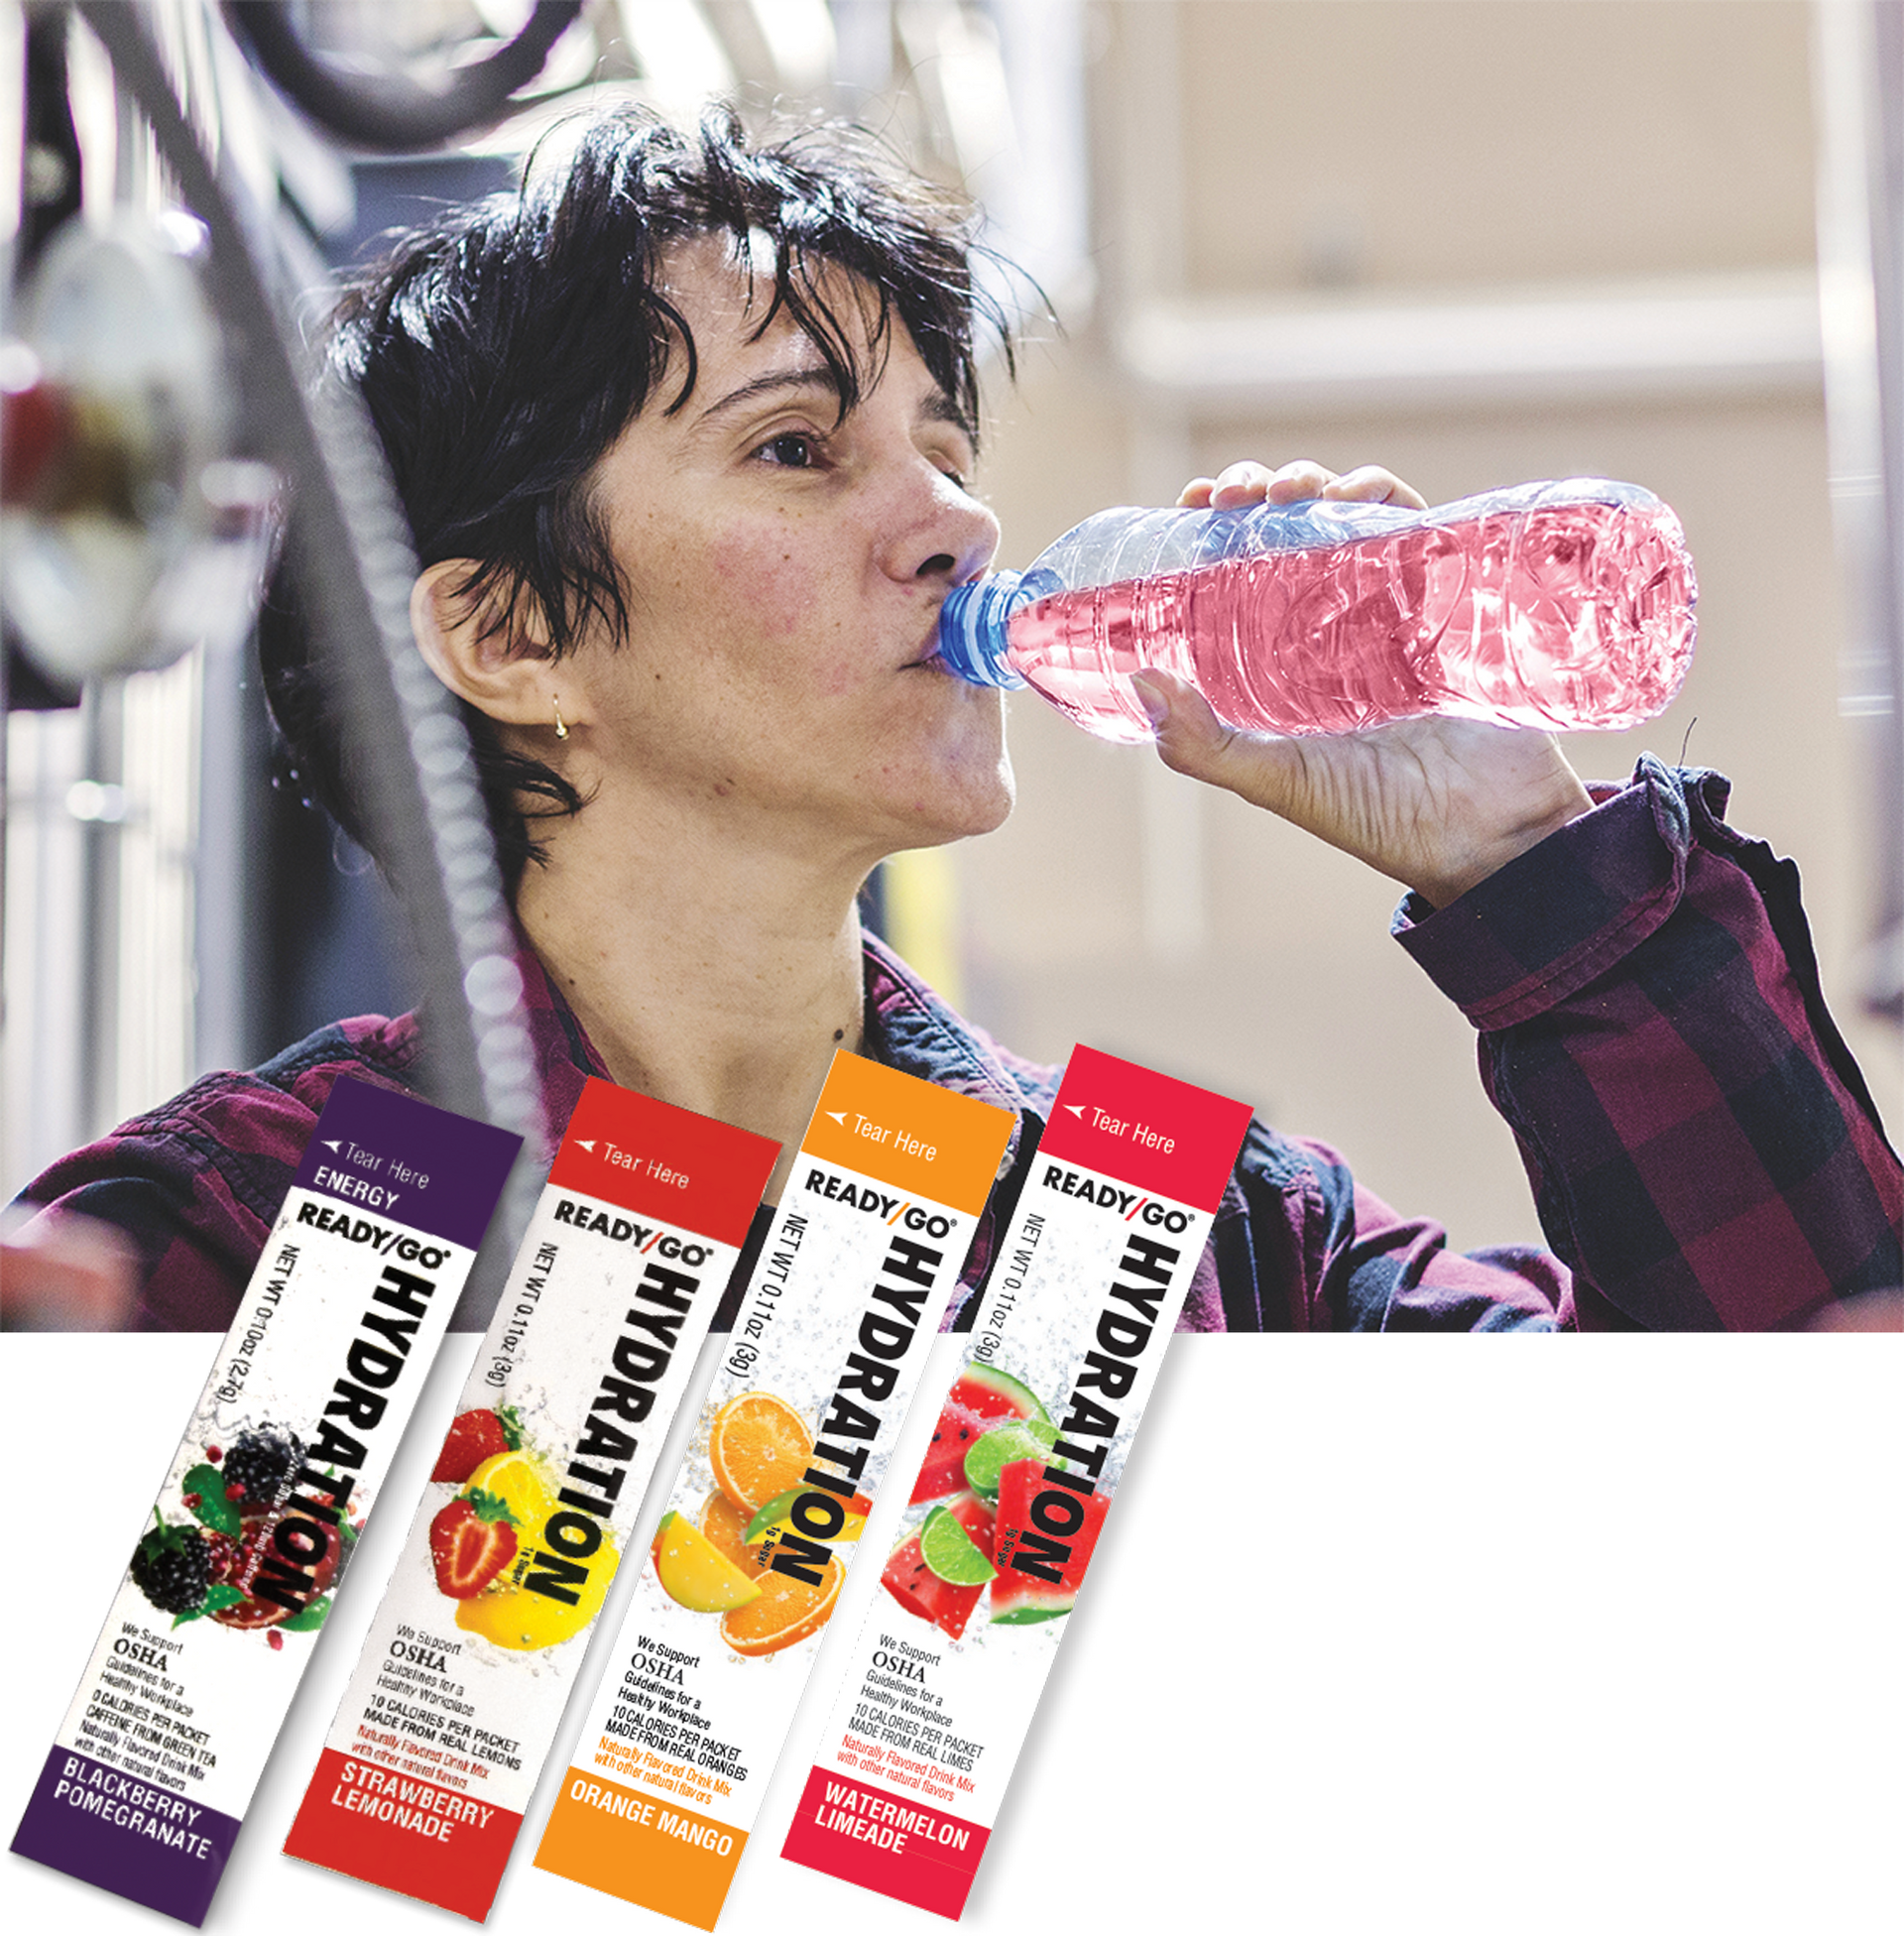 A woman staying hydrated by using a Ready/Go® Hydration drink mix with an overlay image of four packets of Ready/Go® Hydration drink mix - one each of the four flavors; Strawberry Lemonade, Orange Mango, Watermelon Limeade and ENERGY Blackberry Pomegranate.